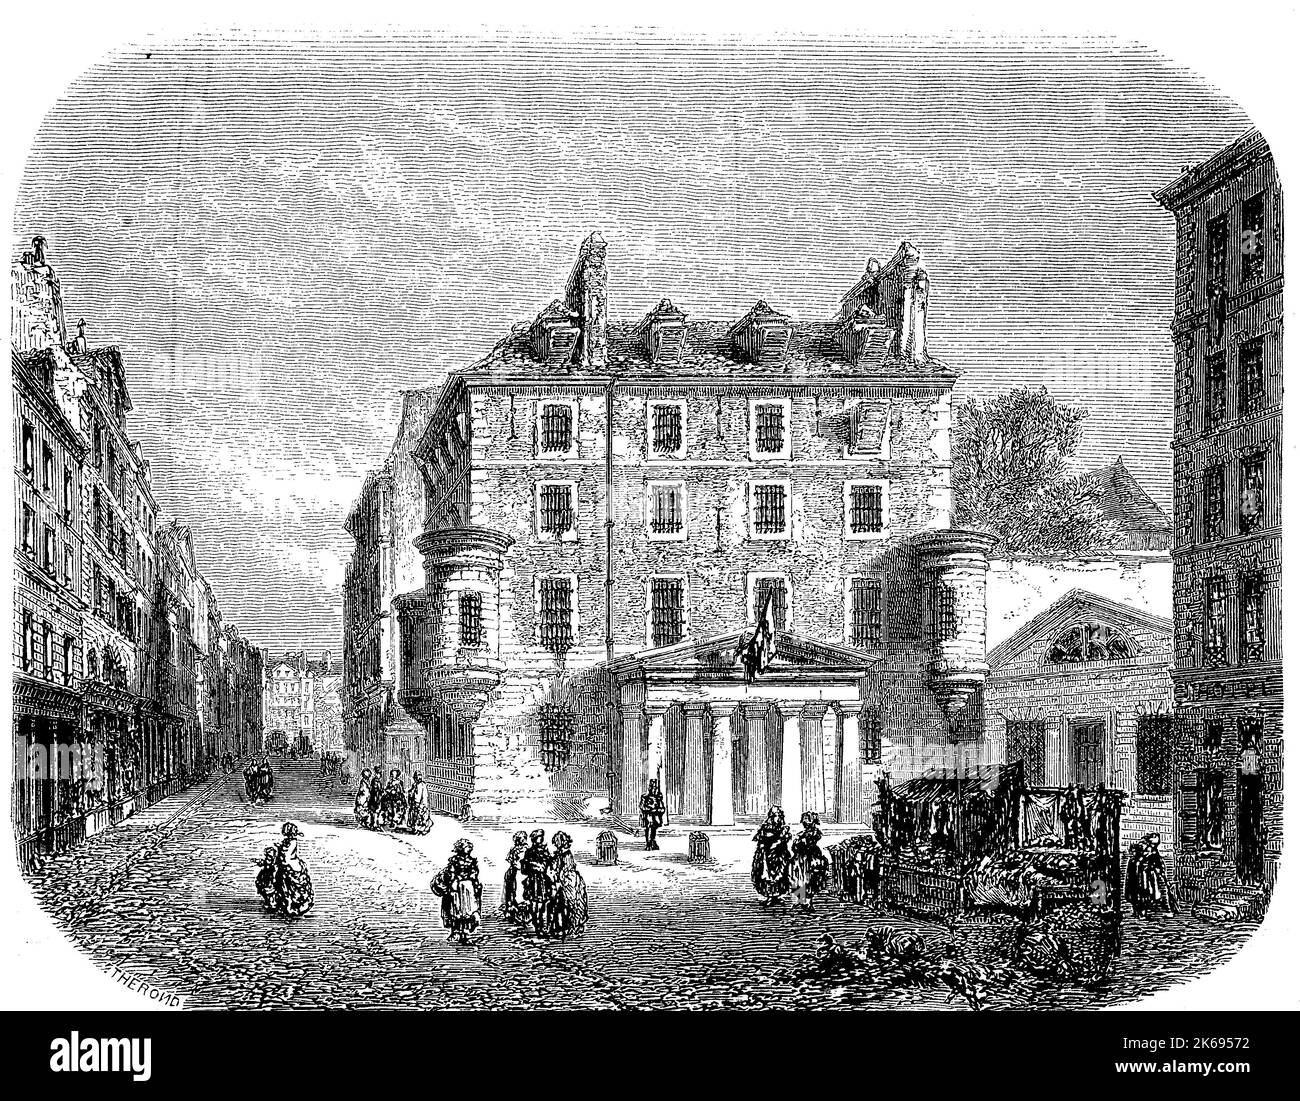 Digital improved reproduction, prison of abbey saint-germain des pres, prison de l'abbaye was a state prison, prison d'etat, in paris, which was used from 1522 to 1854, demolished in 1854, original woodprint from th 19th century Stock Photo